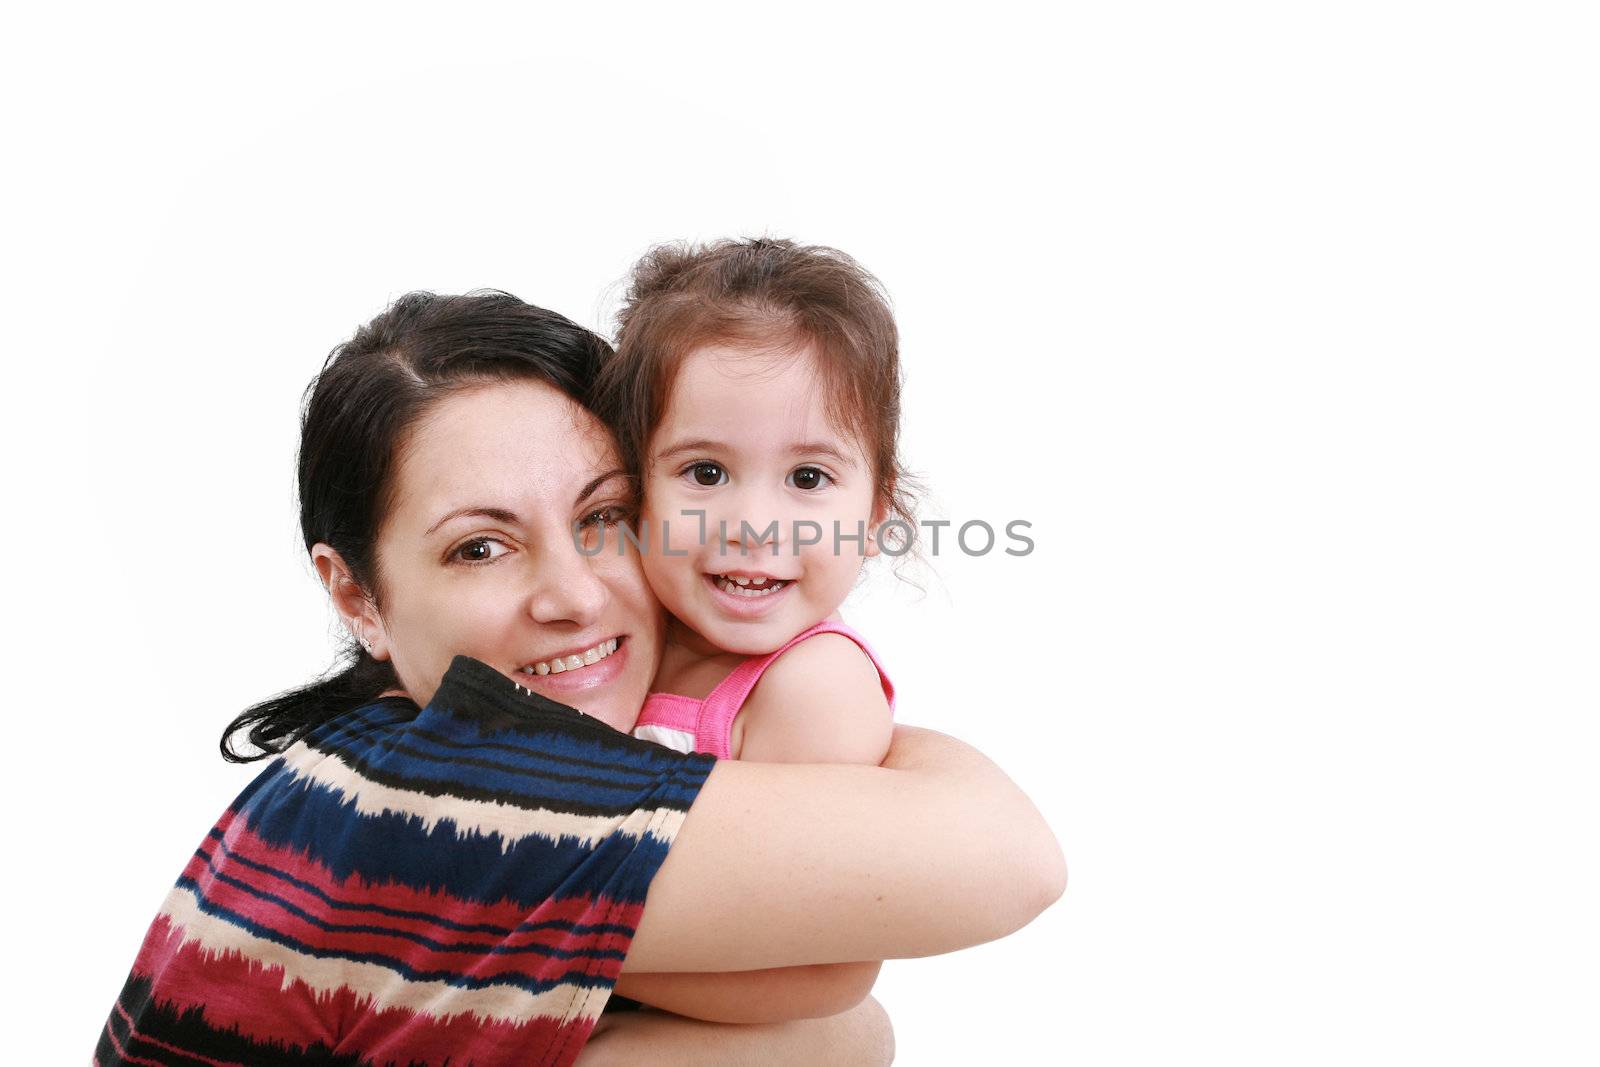 beautiful young mother and her two year old daughter looking at camera